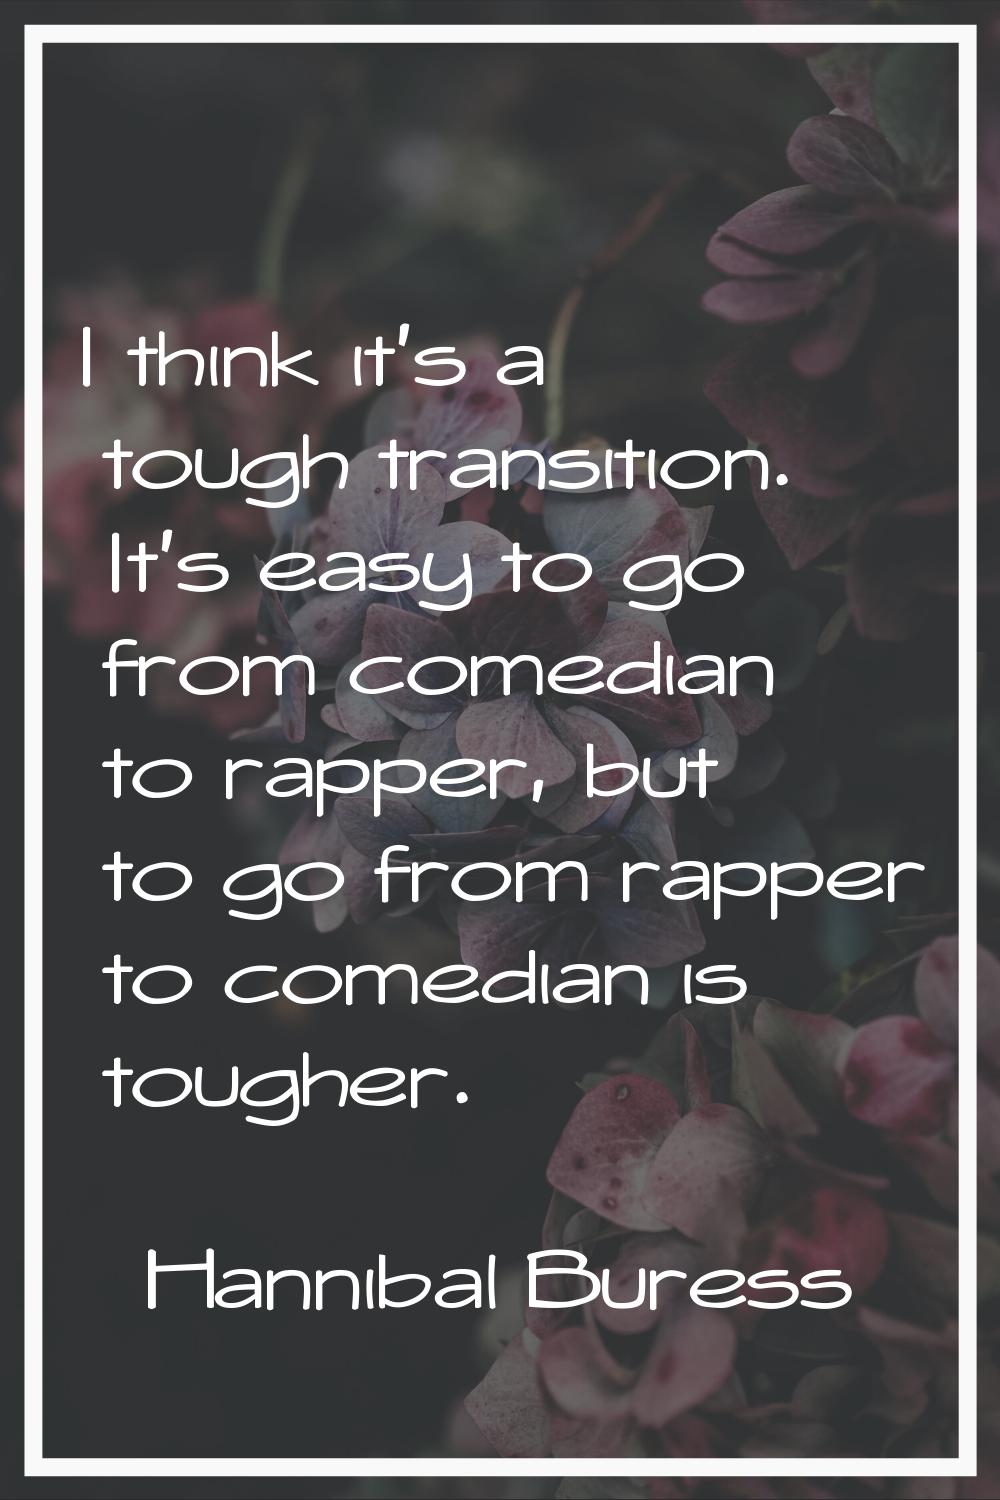 I think it's a tough transition. It's easy to go from comedian to rapper, but to go from rapper to 